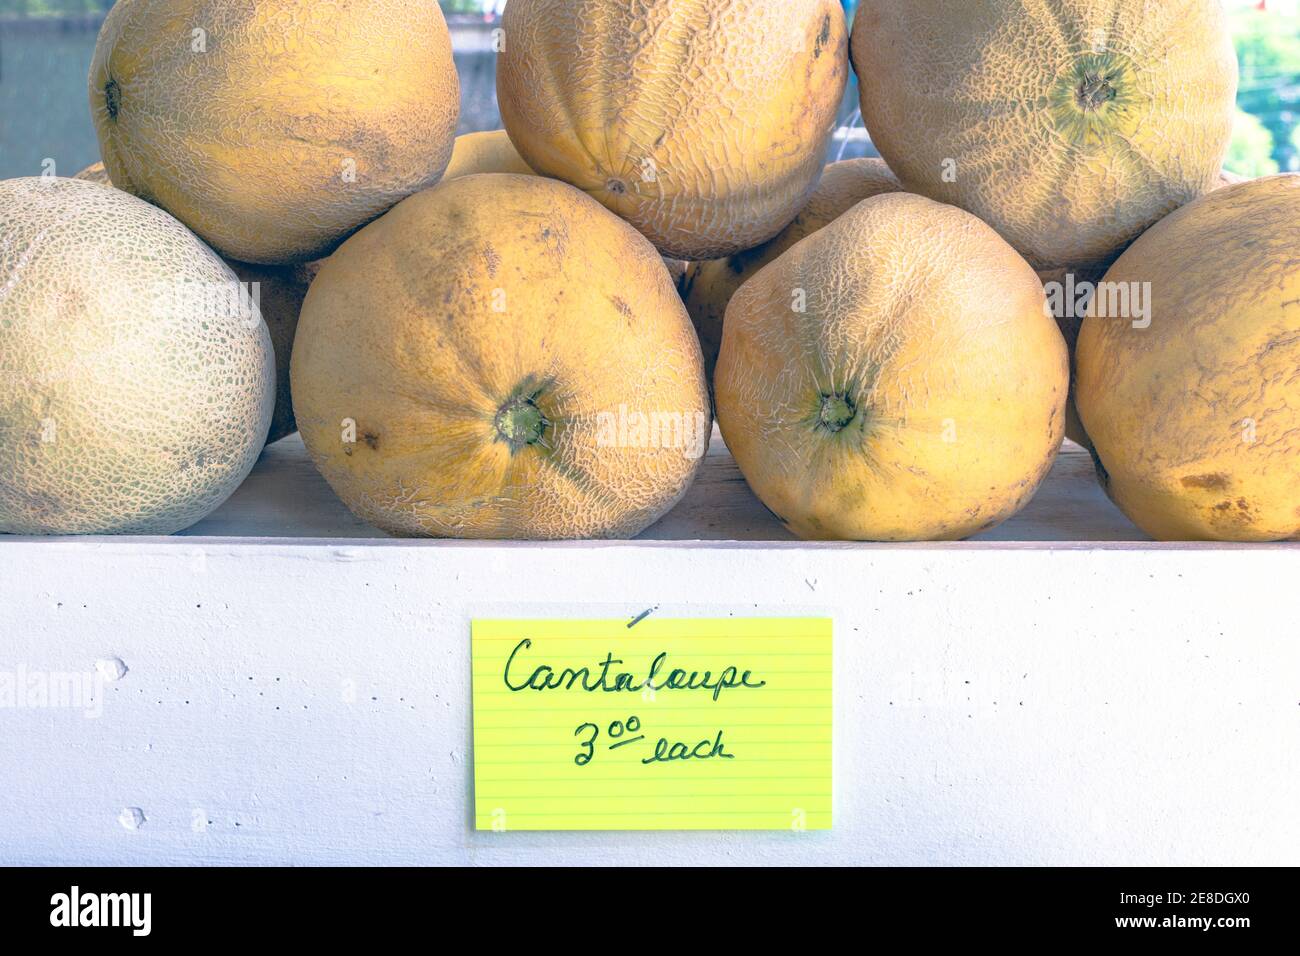 cantaloupe on display at a produce stand Stock Photo